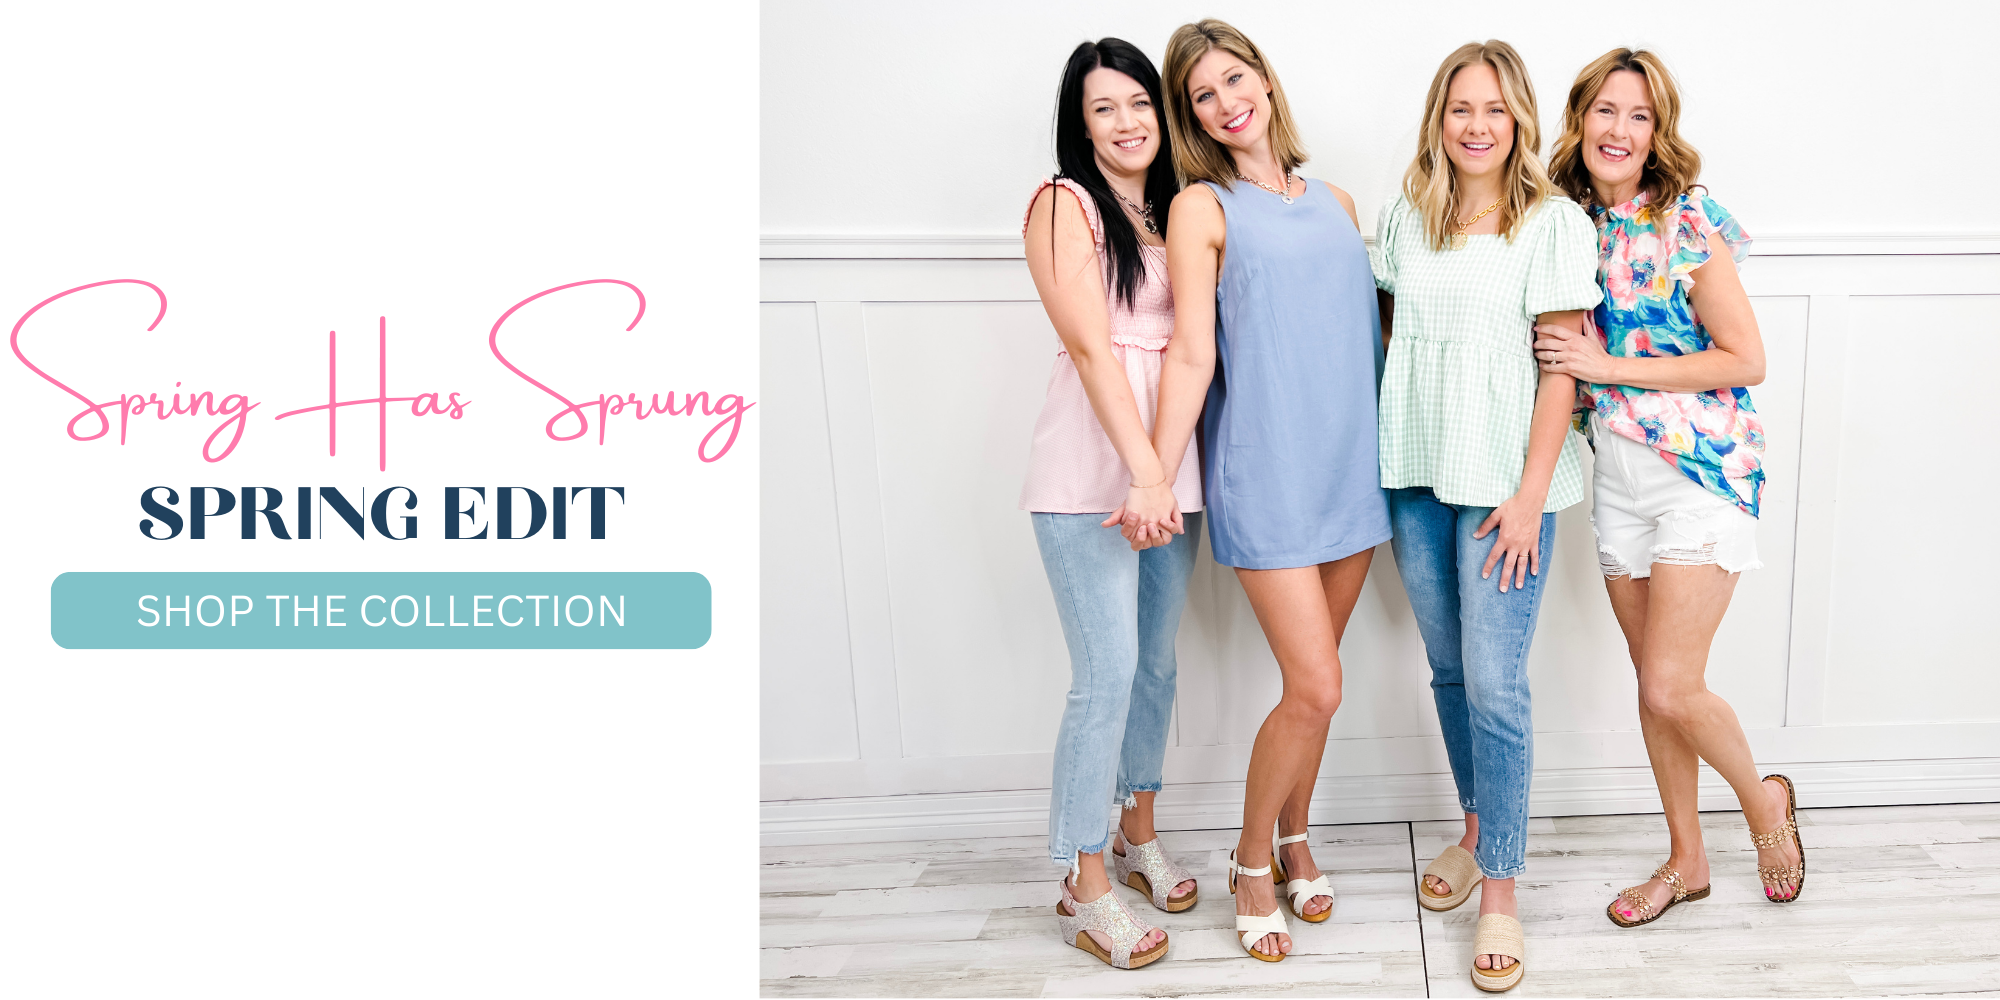 Shop Our Spring Edit Collection